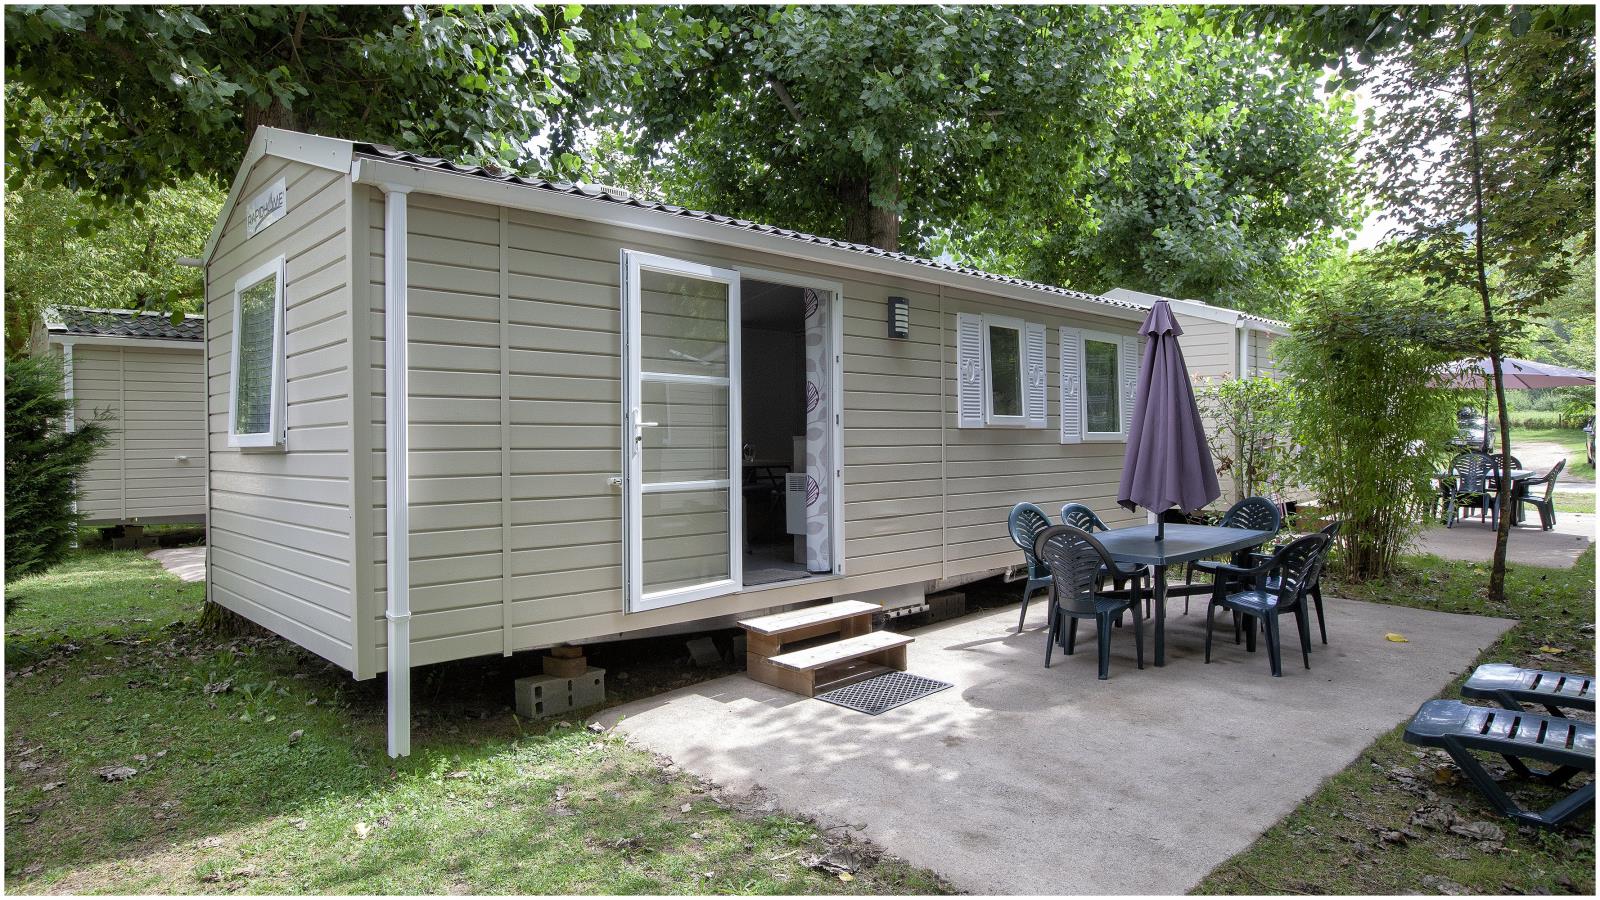 Accommodation - Mobil Home Lodge (Année 2015) - 23M² - Dimanche 4/5 Pers. - Camping Saint-Pal